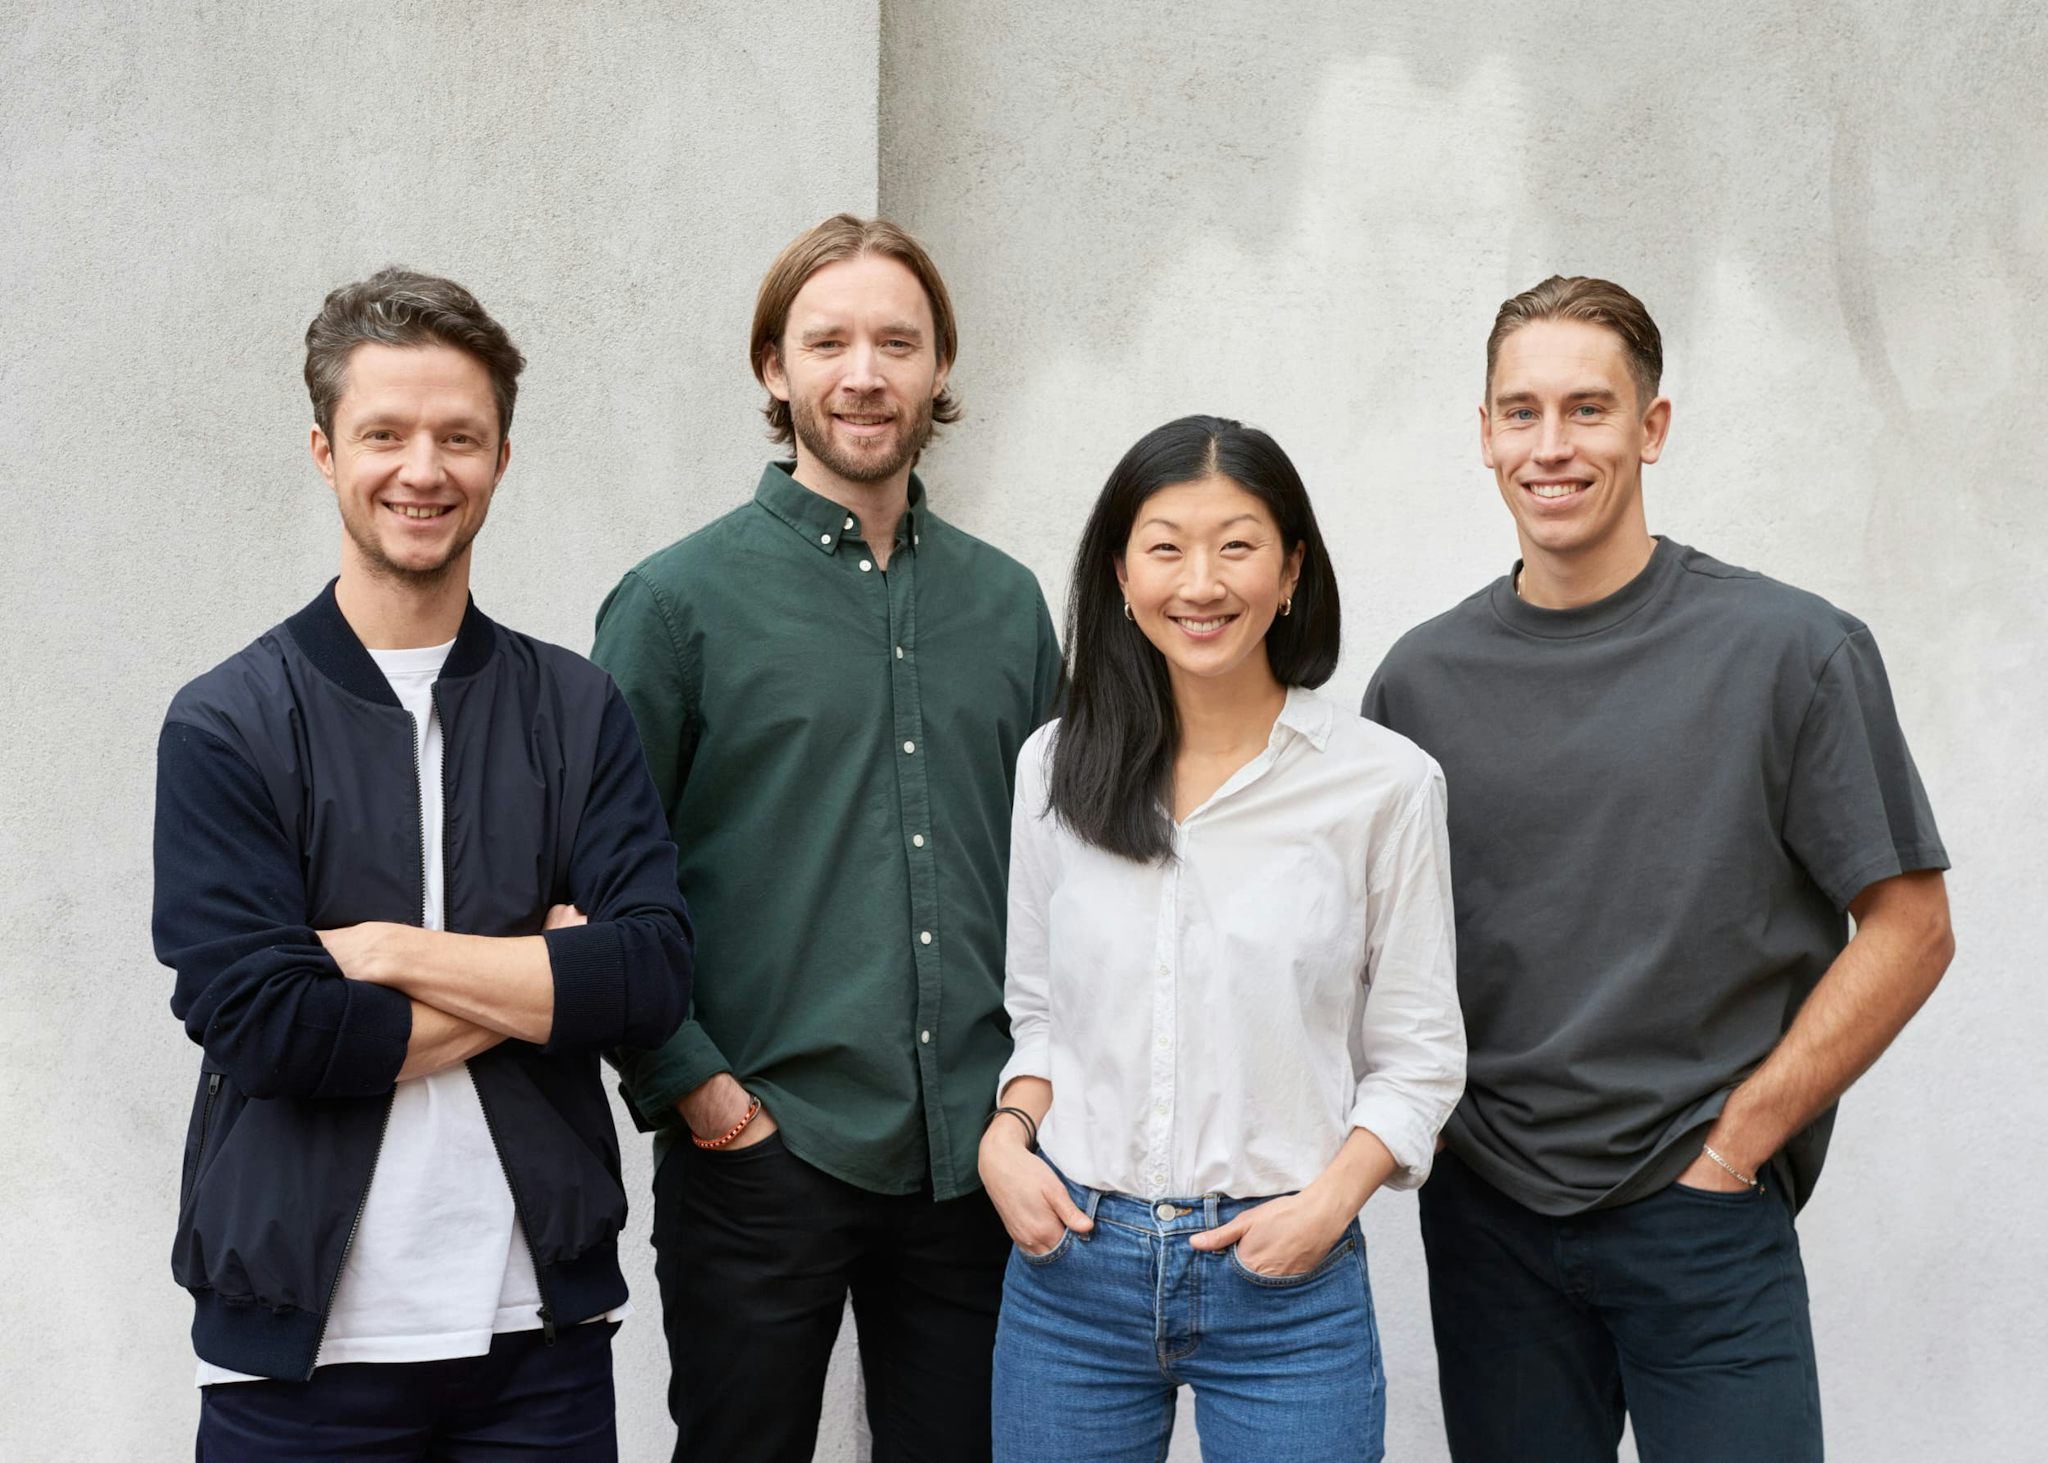 The founding partners of TOTO. From the left: Saulius, Adrian, Mille and Haakon. Photo by Simen Øvergaard